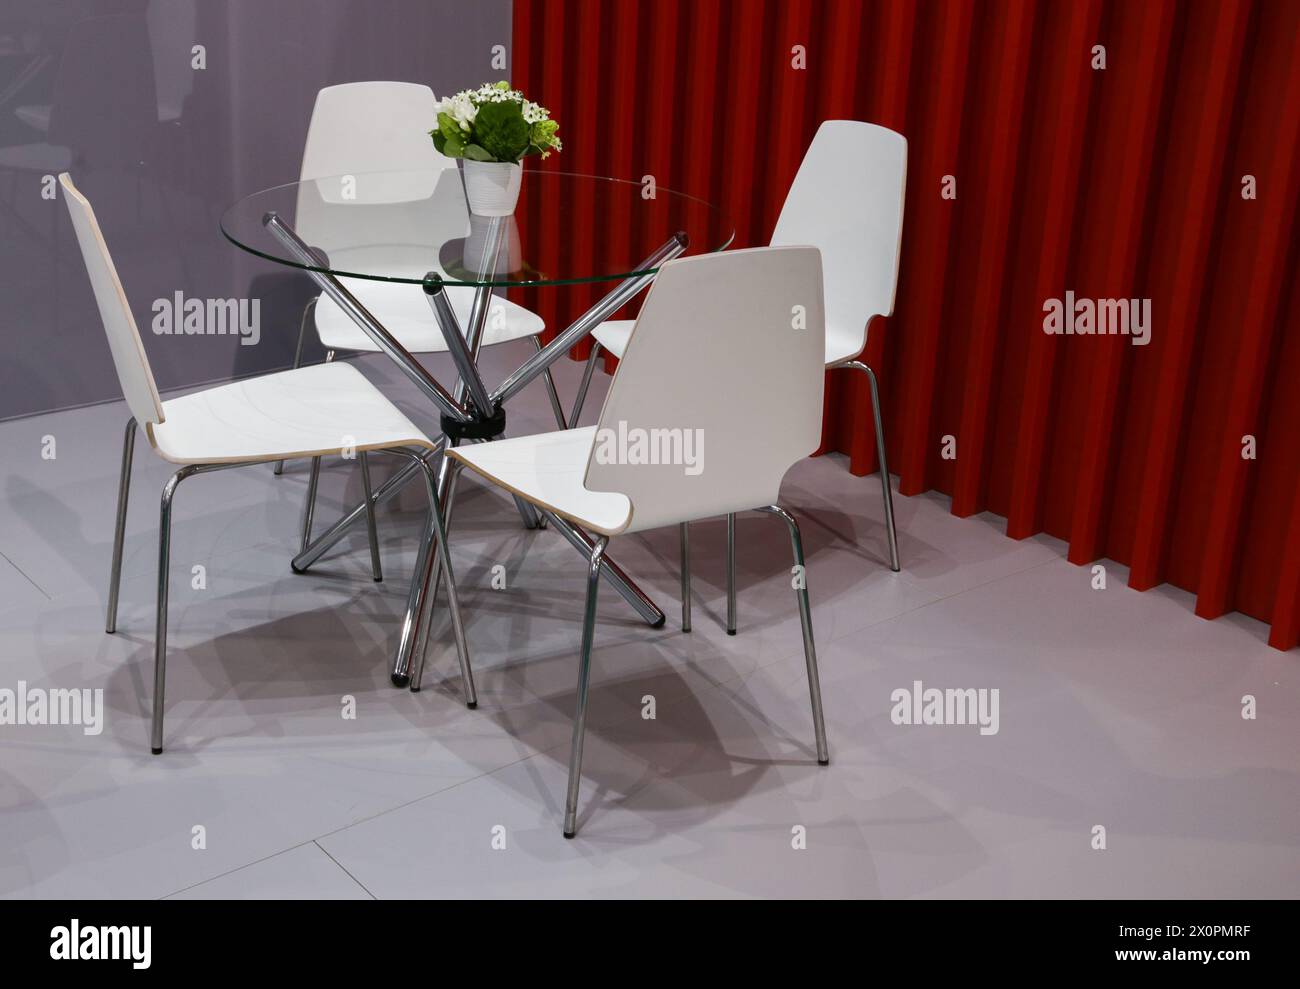 Modern open plan office interior with 4 chairs and round glass transparent table. Stock Photo